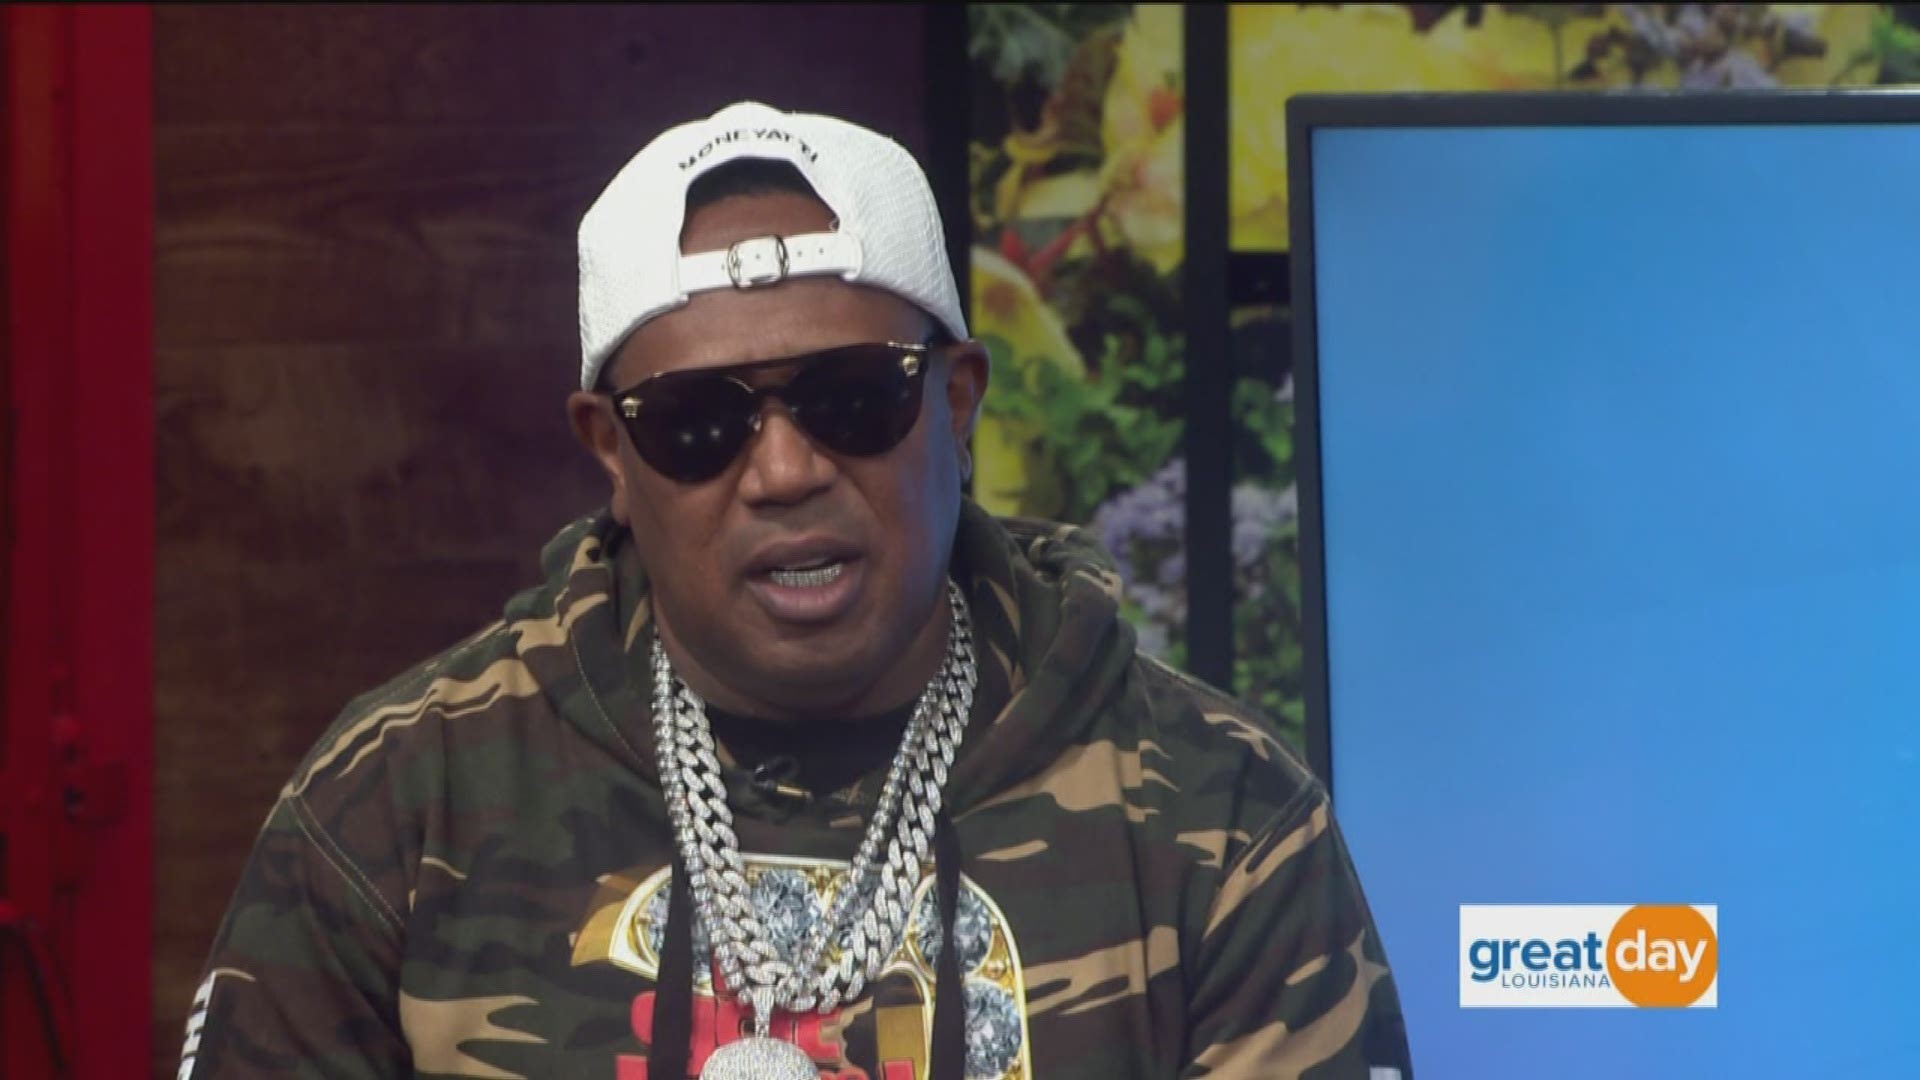 Entrepreneur, entertainer, singer and father: Master P does it all. He's here to talk to Chef Kevin about how fatherhood has molded him into the man he is today. We even speak to Master P's son Romeo about his favorite memories with his dad.